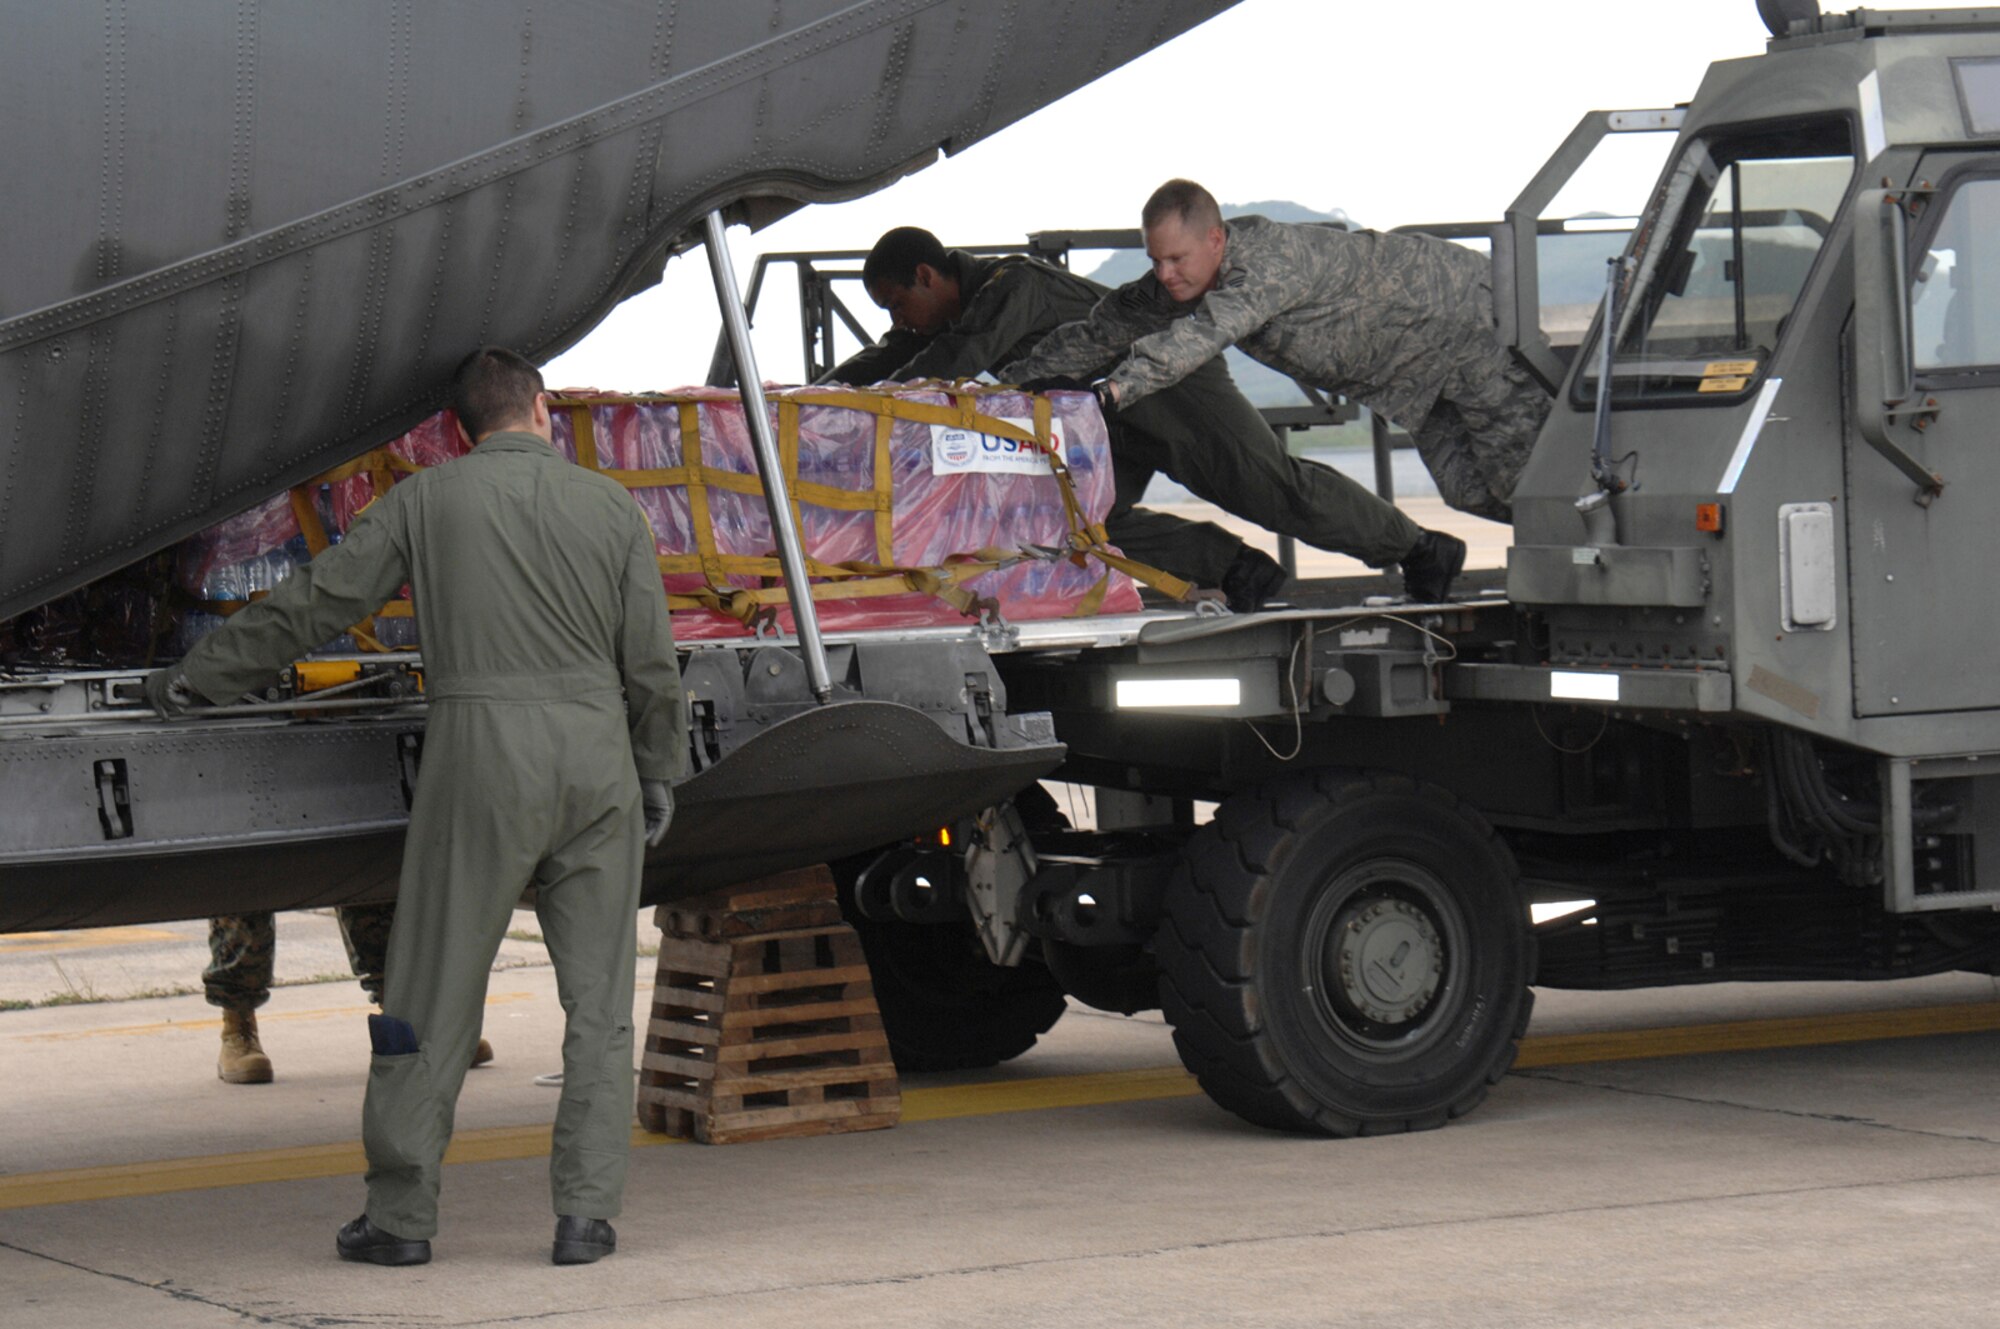 UTAPAO, Thailand - Master Sgt. Todd Kneisly, 36th Mission Response Squadron, and Airman 1st Class Robert Gore, 36th Airlift Squadron, Yokota Air Base, Japan, load a C-130 Hercules with humanitarian relief supplies for victims of Burma who experienced one of the regions deadliest cyclones, Cyclone Nargis.  As of May 12, 2008 a total of more than $3 million in USAID, and humanitarian assistances has been provided to Burma since the catastrophic destruction on May 2. (USAF Photo/Senior Airman Sonya Croston)